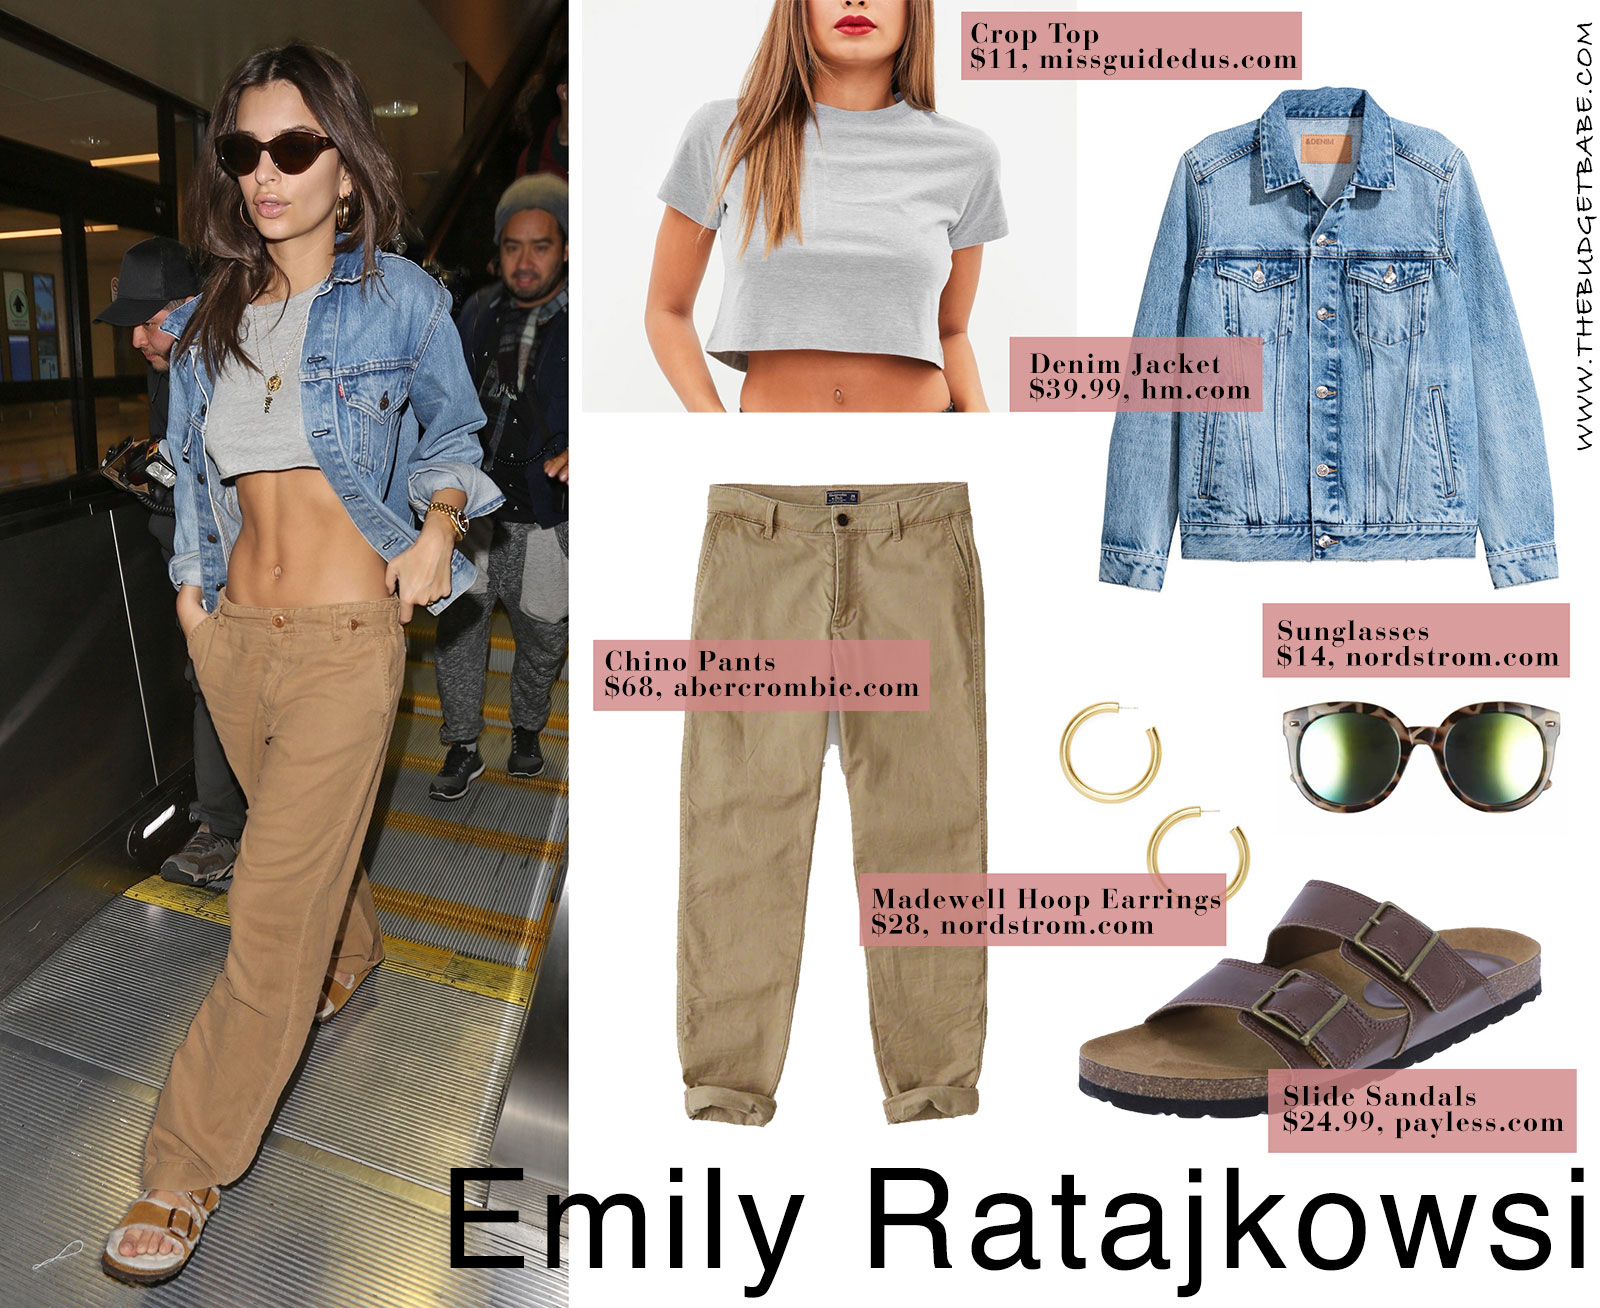 Emily Ratajkowski's cargo pants and crop top look for less